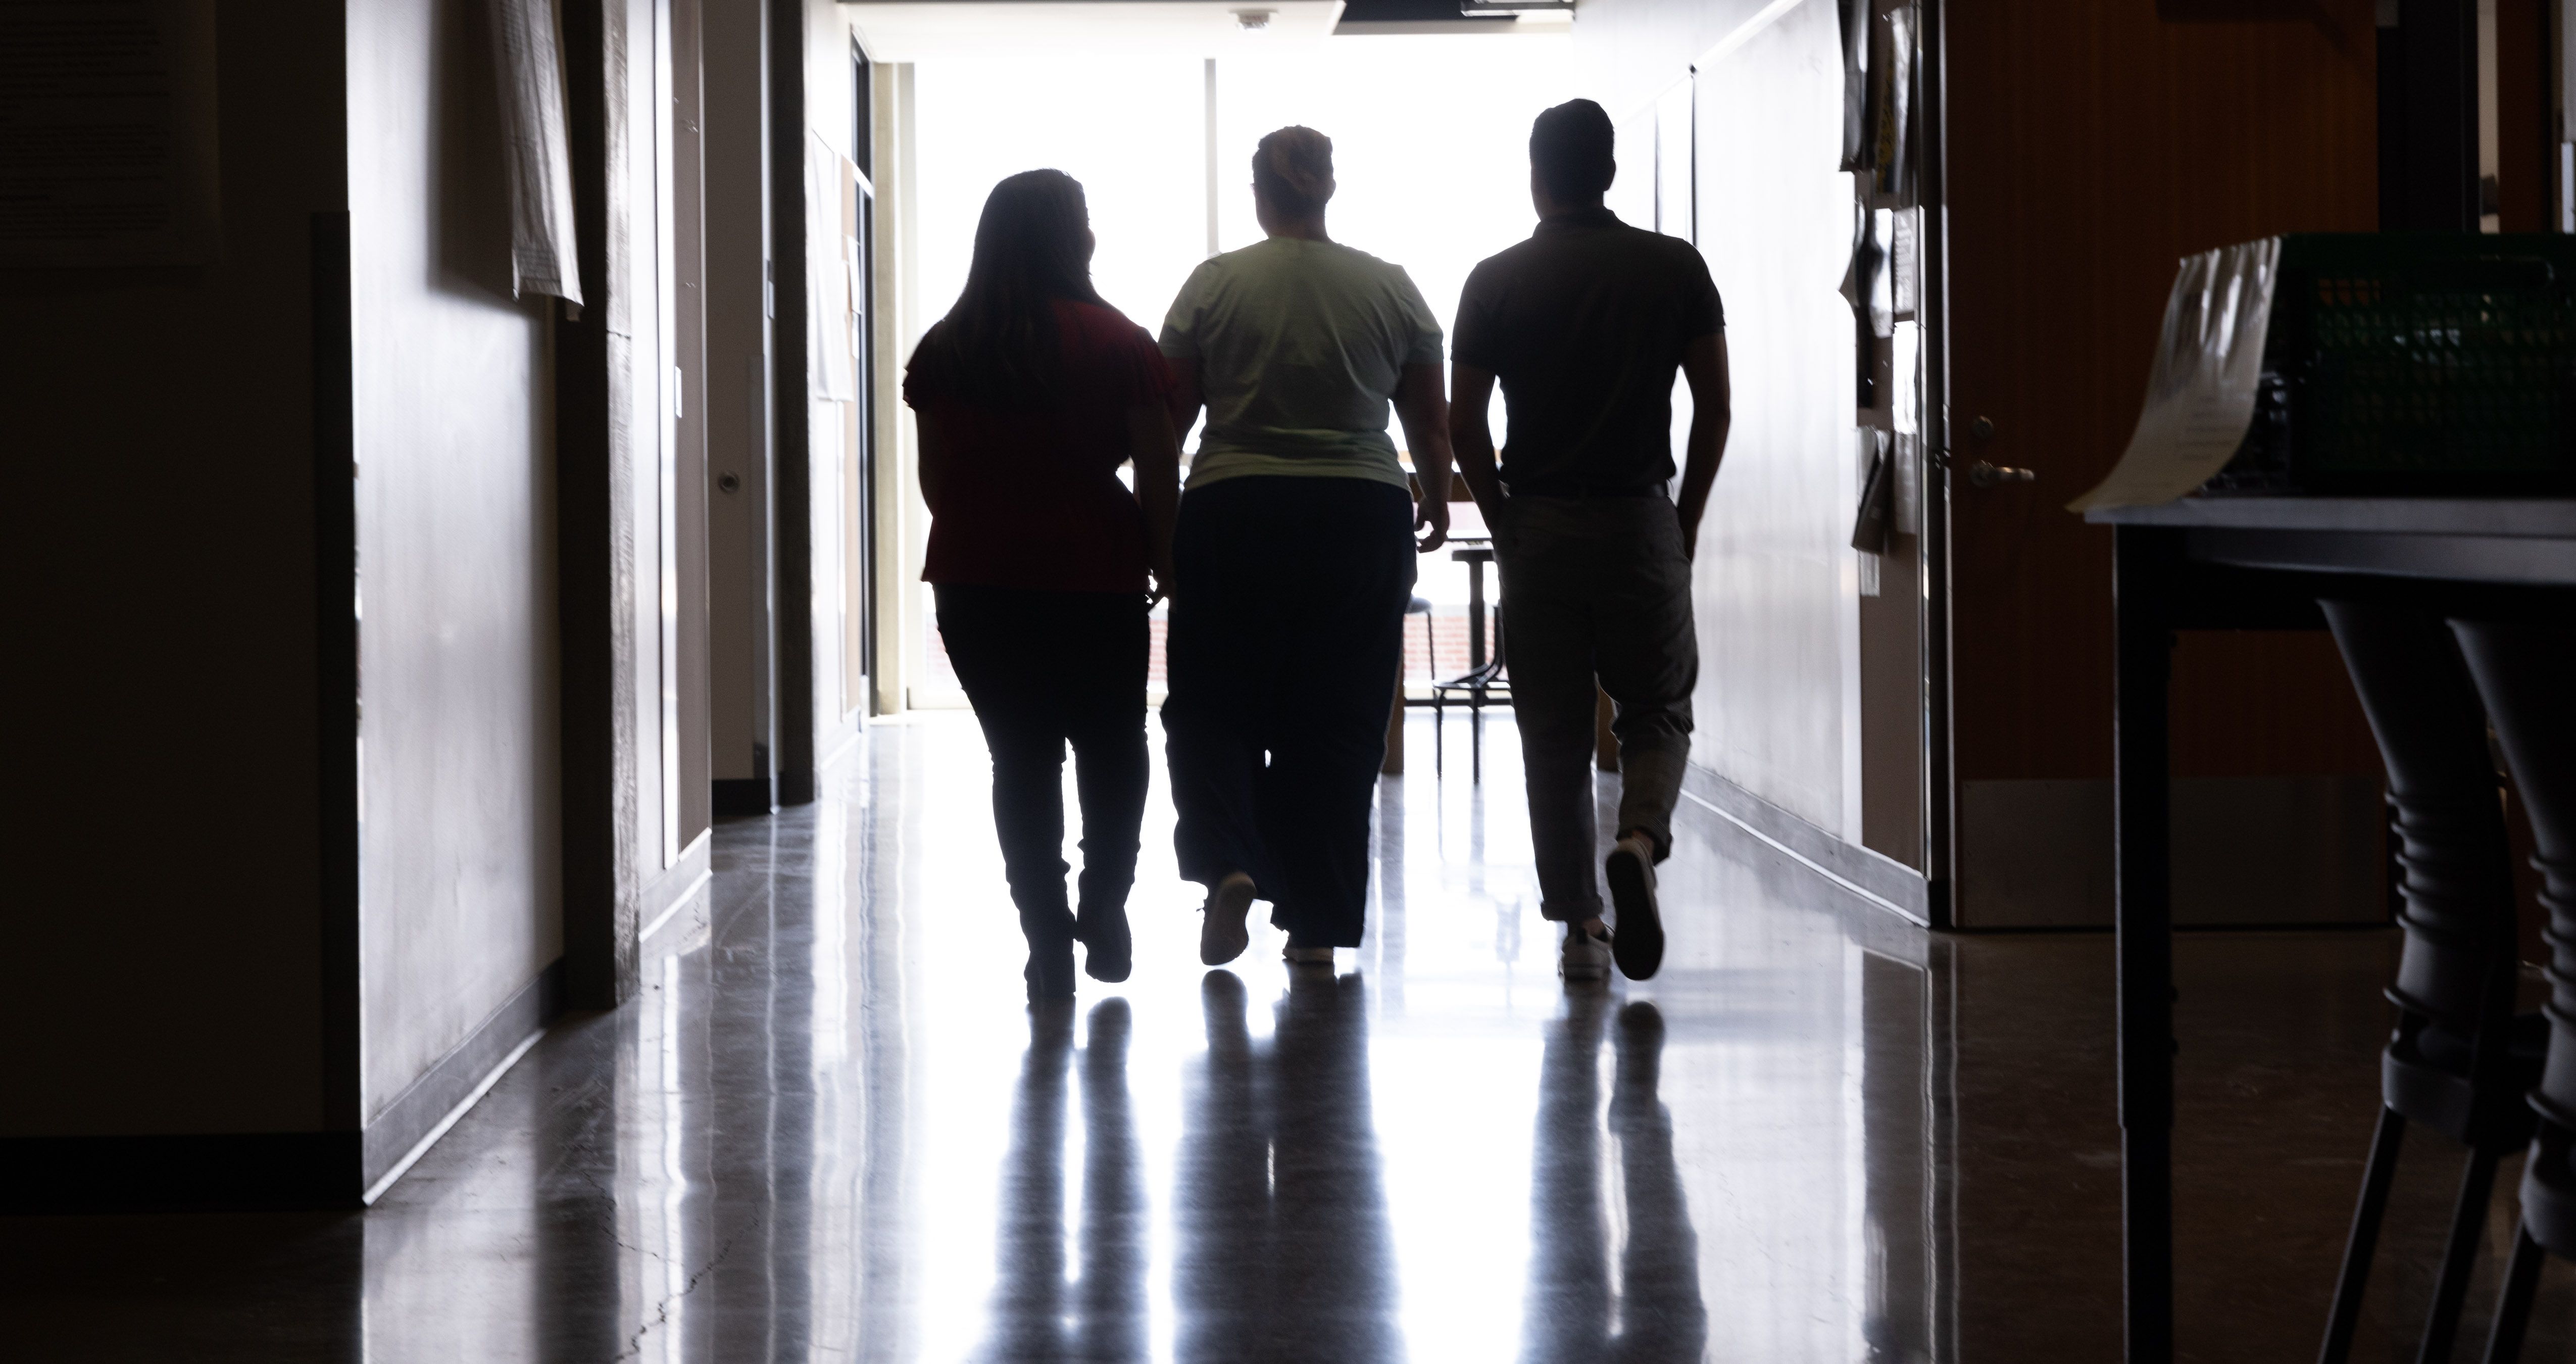 Three students within the sociology department at Central Washington University take a walk through the halls.